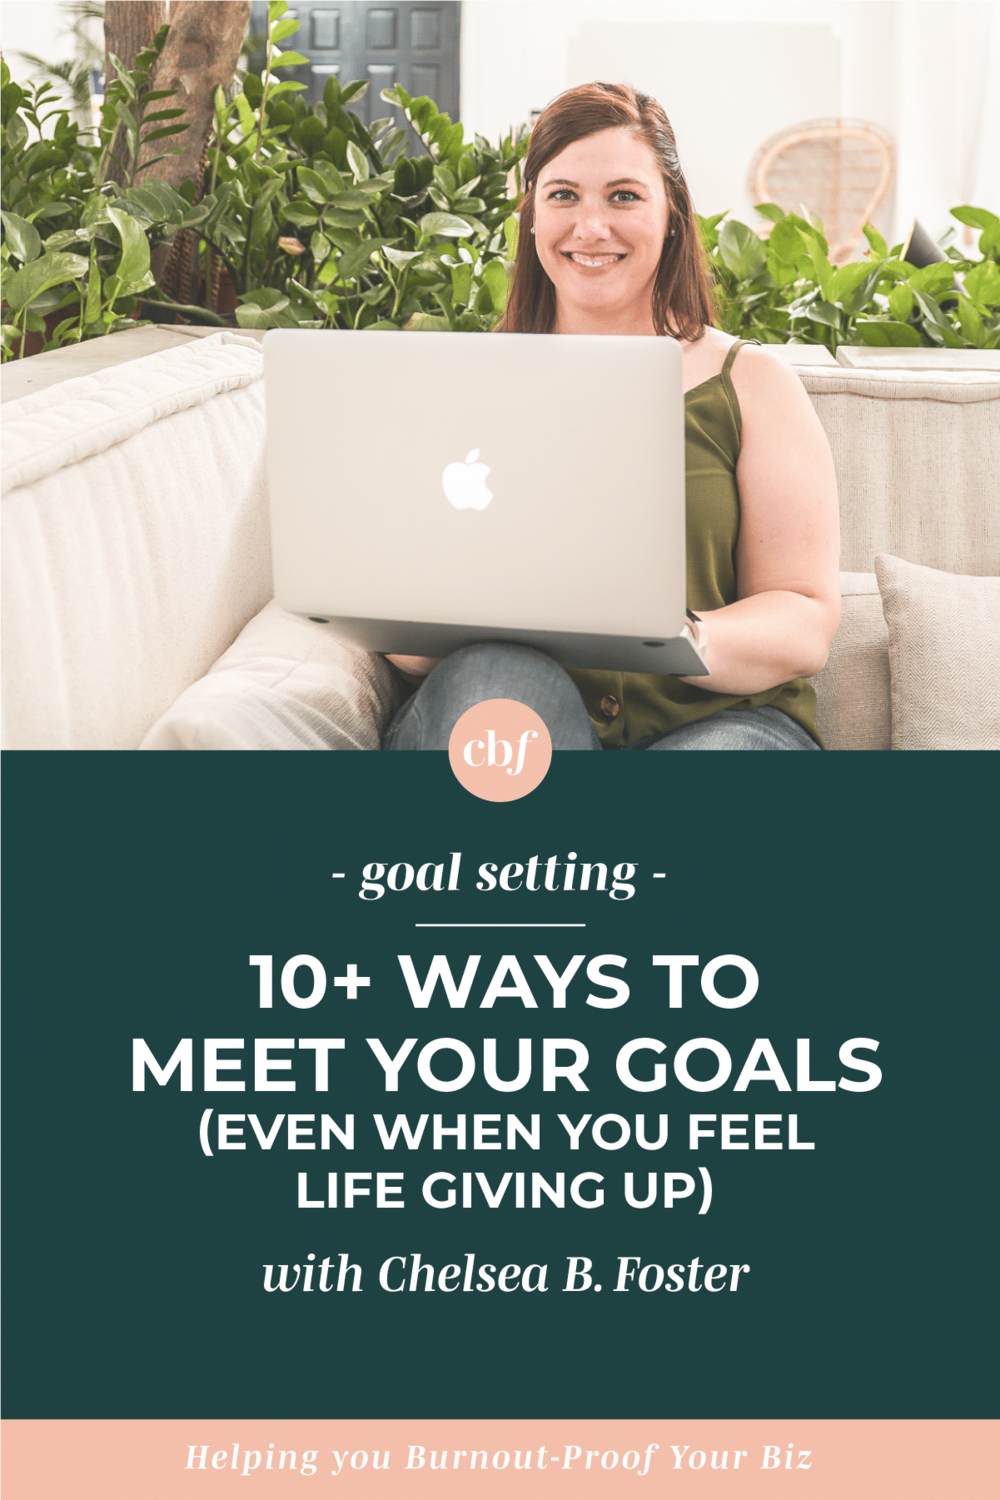 Burnout-Proof Your Biz with Chelsea B Foster | 10+ Ways to Stay Accountable to Your Goals (even when you feel like giving up)